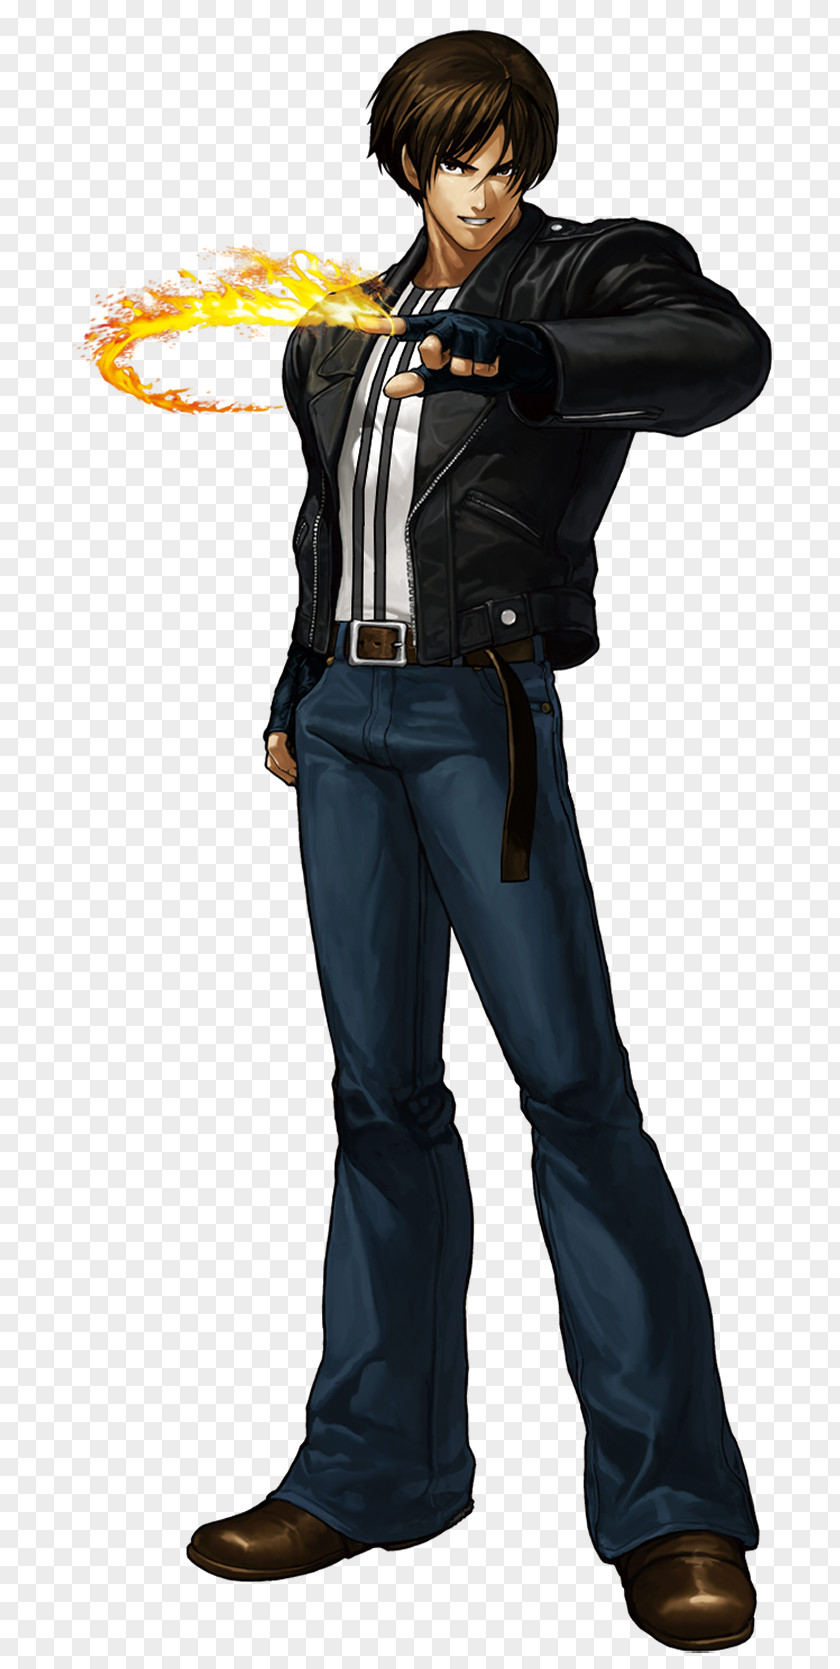 Mugen Souls Characters The King Of Fighters XIII Fighters: Maximum Impact Kyo Kusanagi '96 Iori Yagami PNG